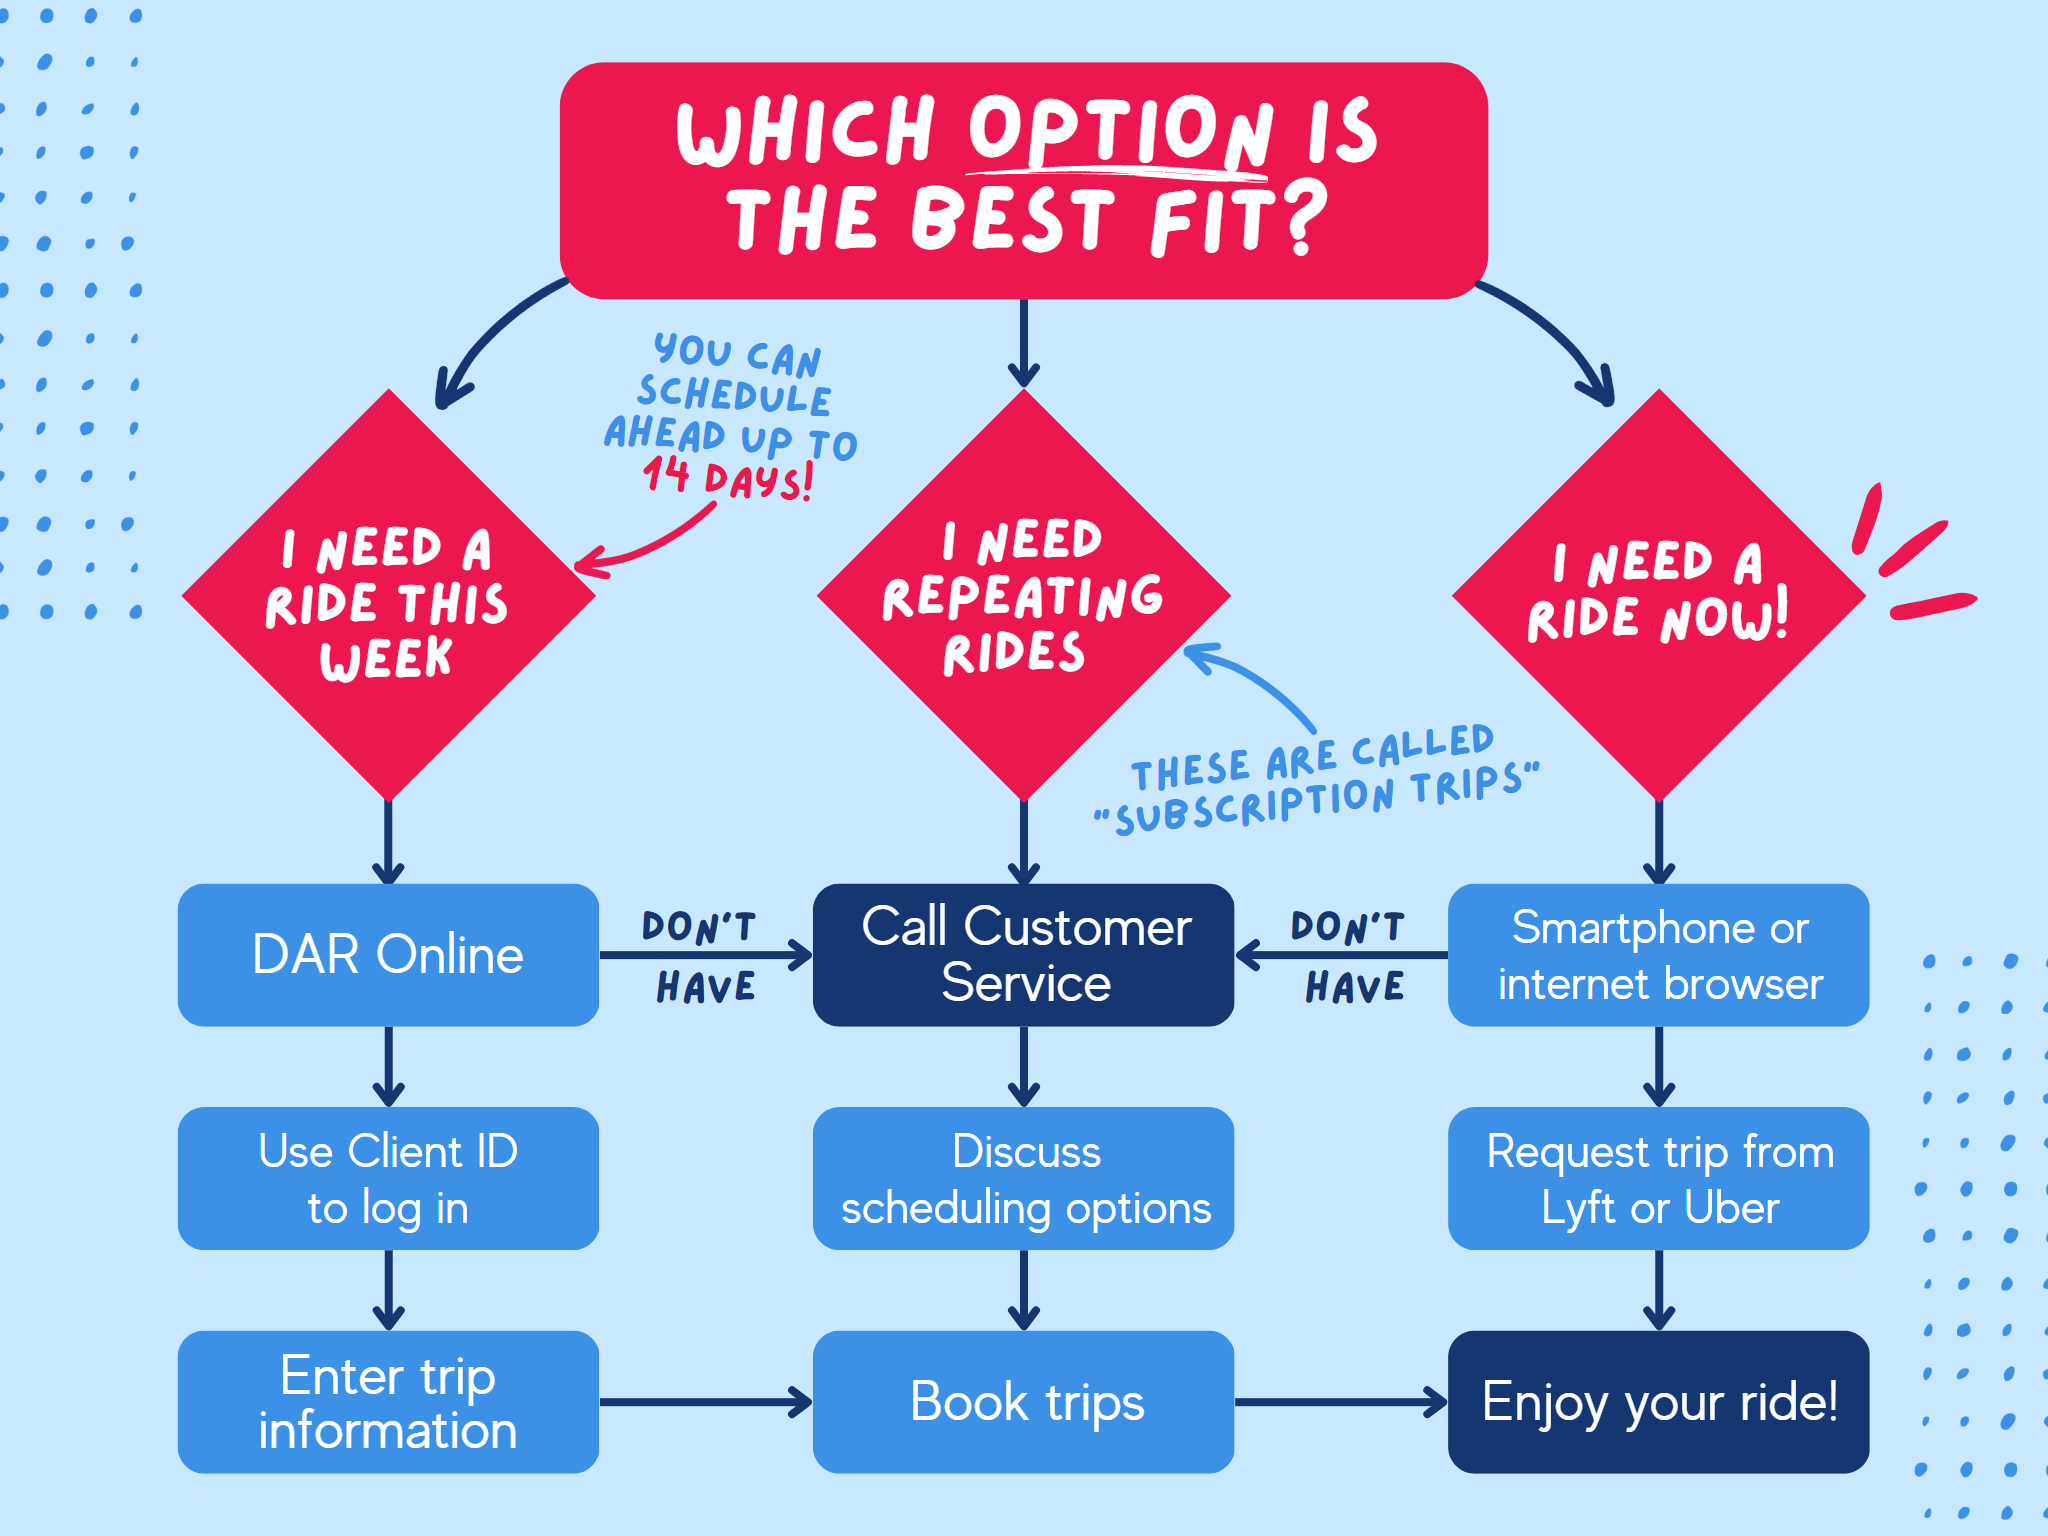 Which Option is the best fit? First scenario: I need a ride this week. Do you use DAR Online? -If NO, call customer service to discuss scheduling options and book trips. -If YES, use your Client ID to log in. Enter information and book trips. Tip: You can schedule ahead up to 14 days! Second Scenario: I need repeating rides. These are called subscription trips! Call customer service to discuss your scheduling options and book subscription trips.  Third Scenario: I need a ride now! Do you have access to a smartphone or internet browser? -If NO, call customer service to discuss scheduling options and book trips. -If YES, request a trip from Lyft or Uber. In every scenario, the last step is to enjoy your ride!